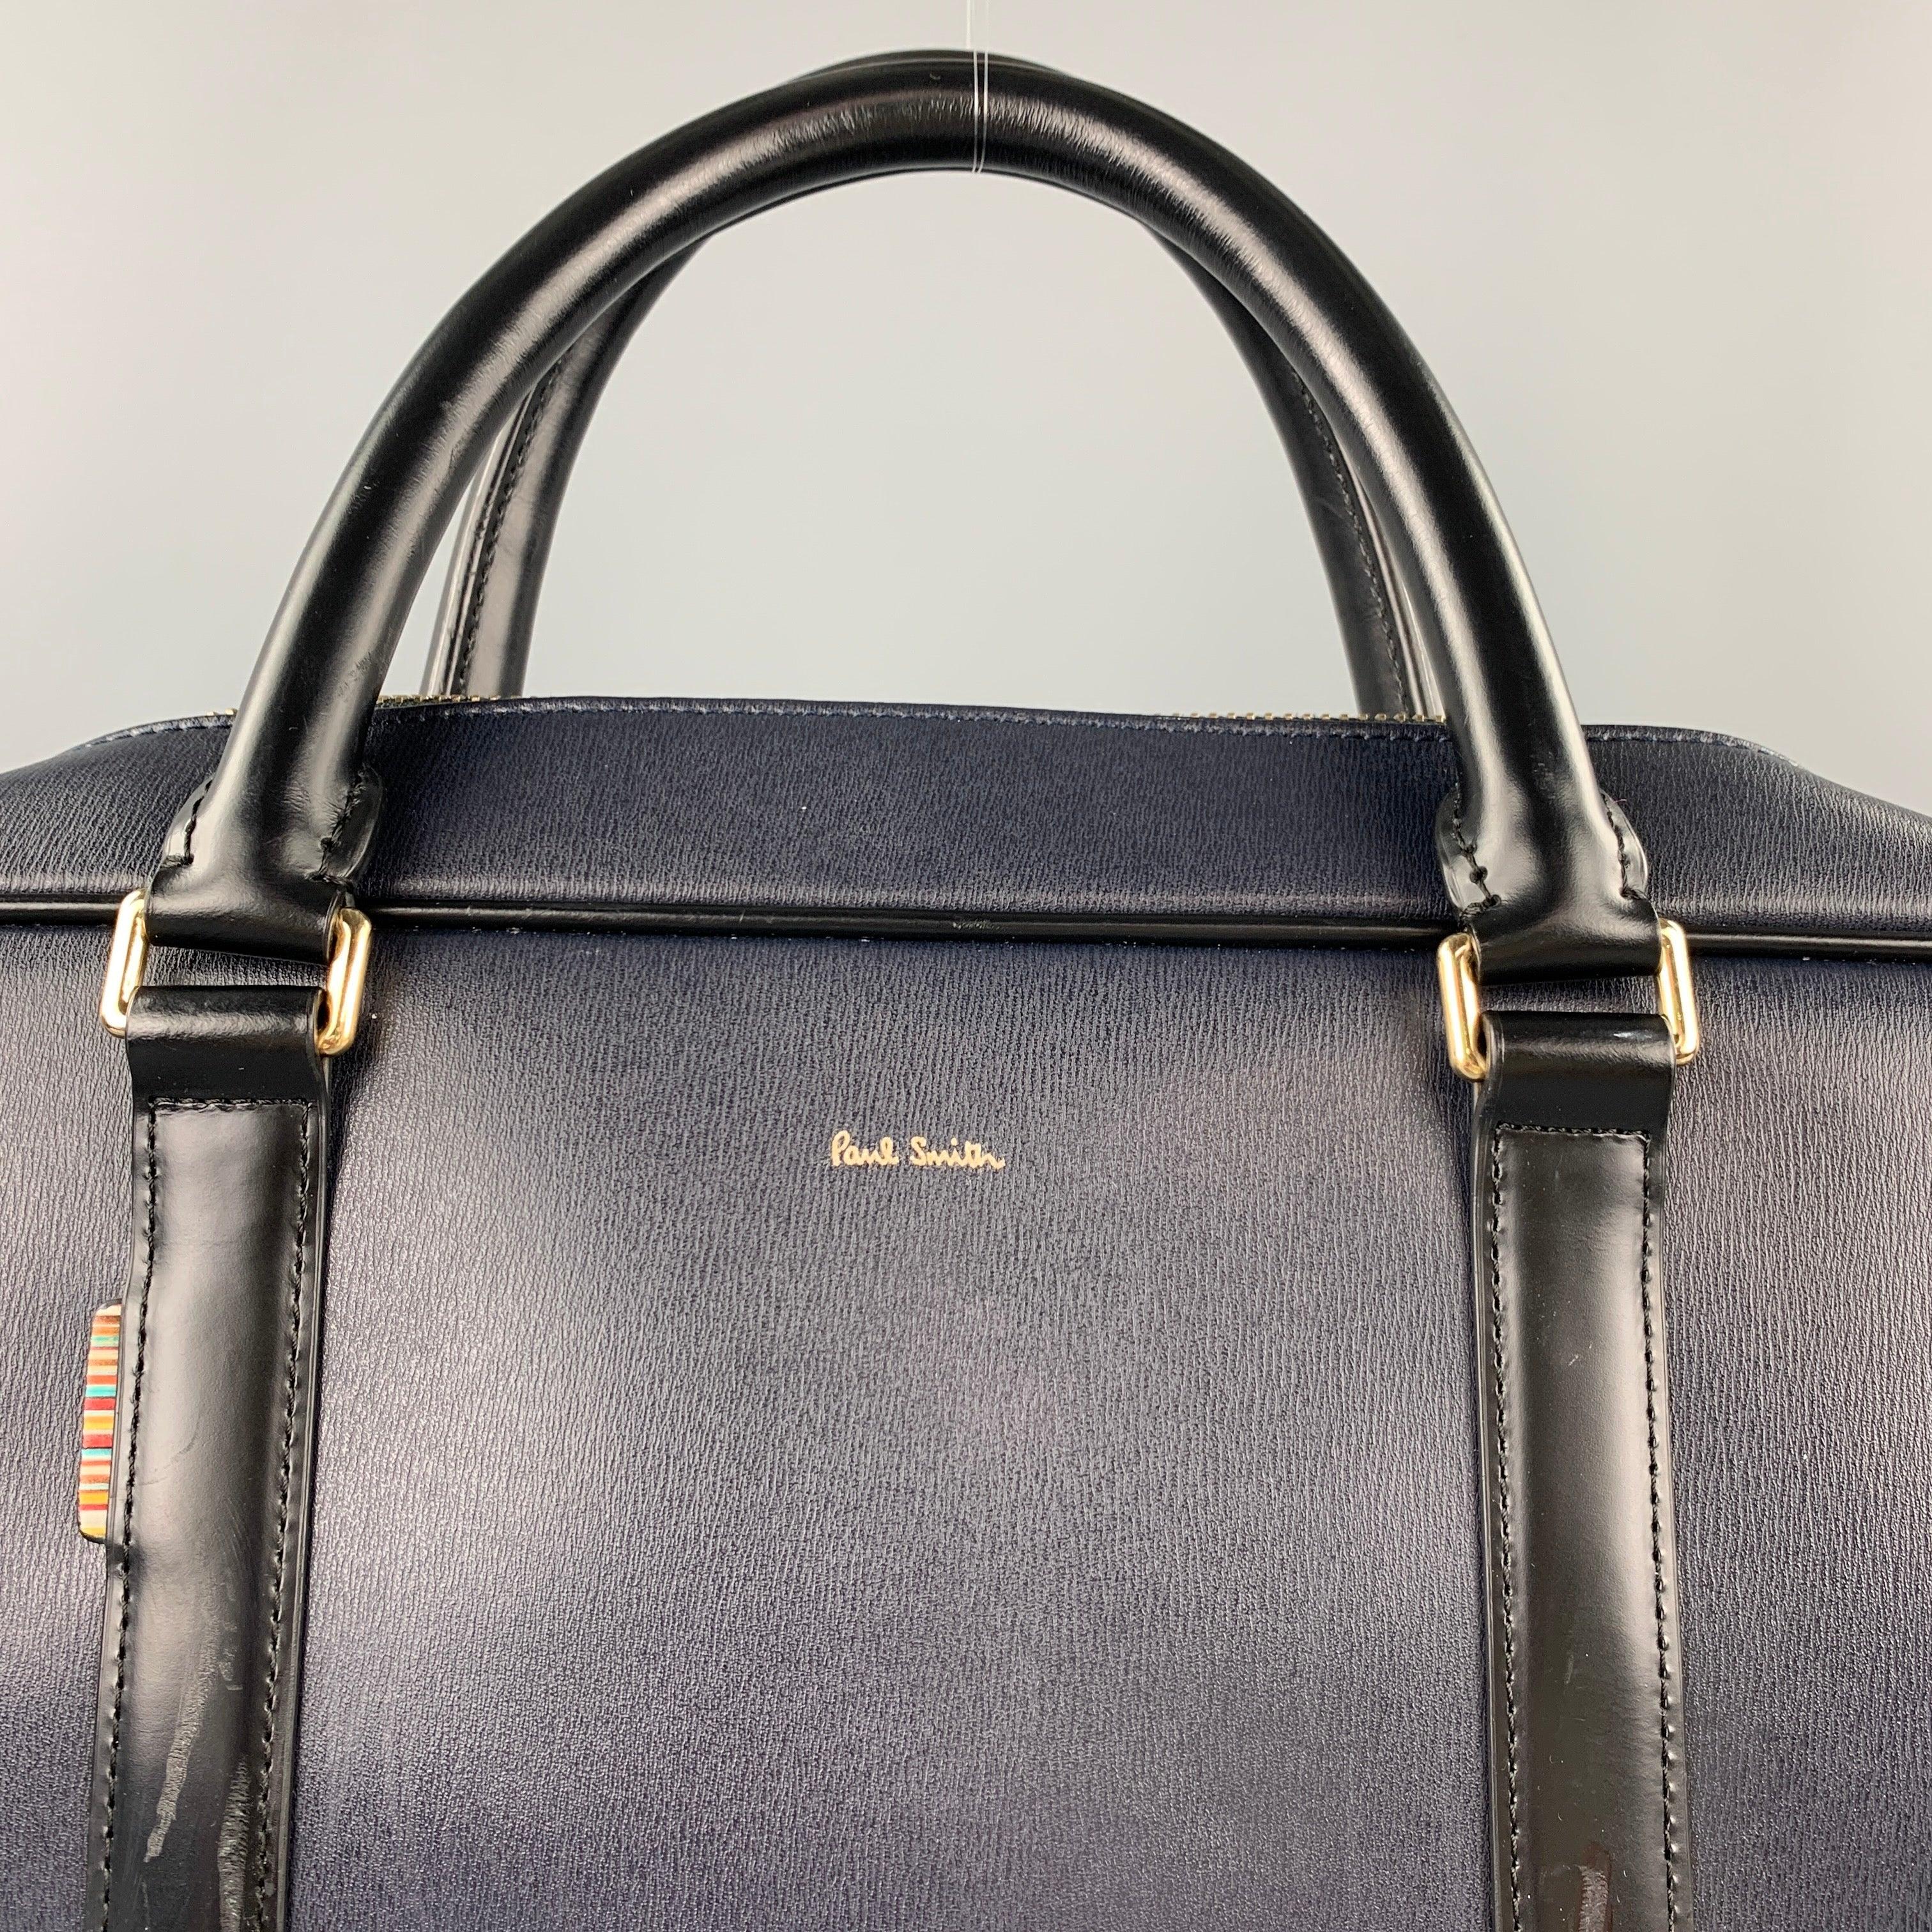 PAUL SMITH briefcase bag comes in a navy & black leather featuring a shoulder strap, top handles, gold tone hardware, inner slots, and a zip up closure. Moderate wear.Good
Pre-Owned Condition. 

Measurements: 
  Length: 15 inches  Width: 3.5 inches 